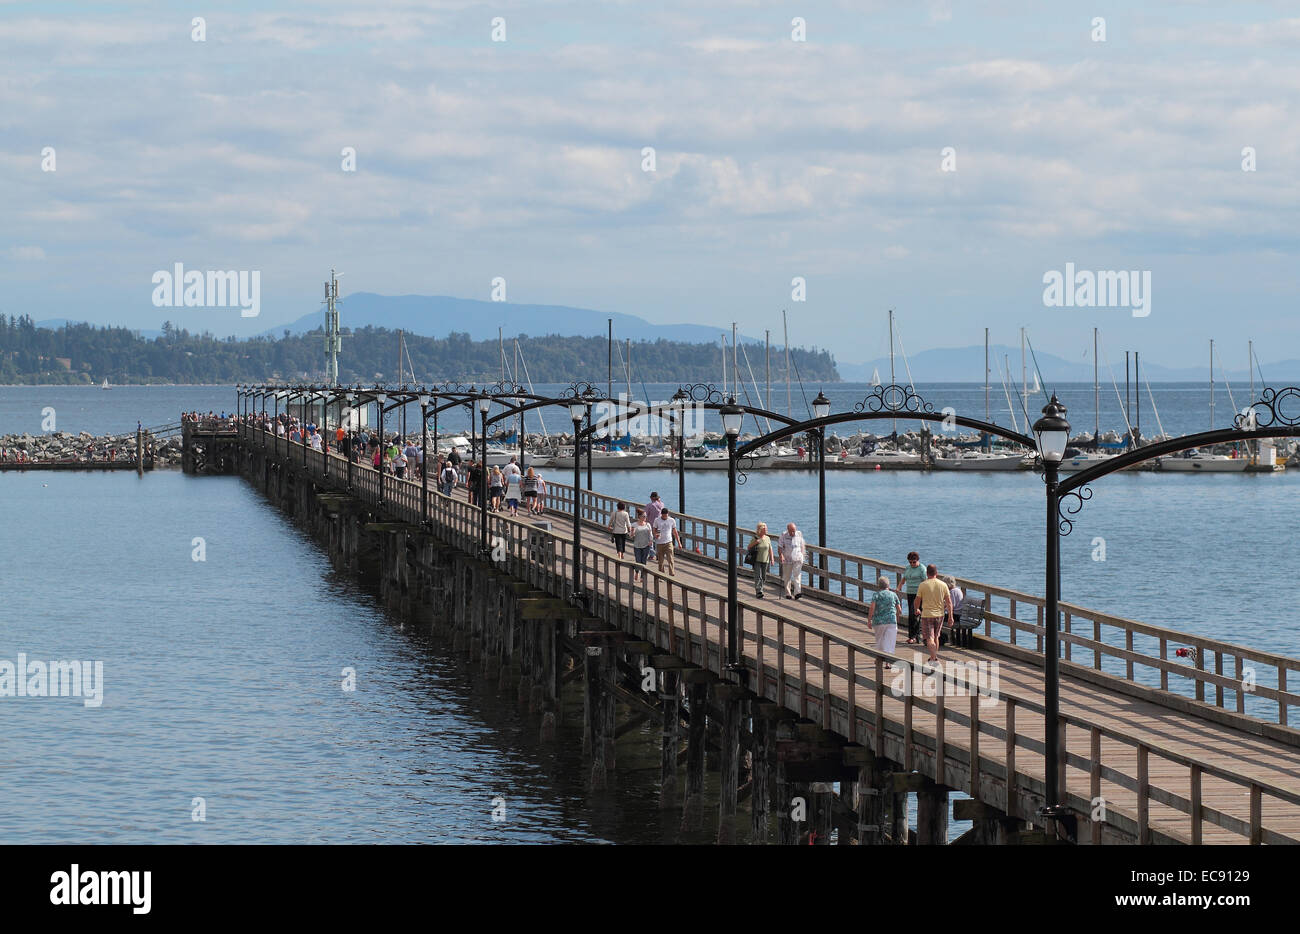 A warm sunny day in the Tourist Town of White Rock, British Columbia. Stock Photo